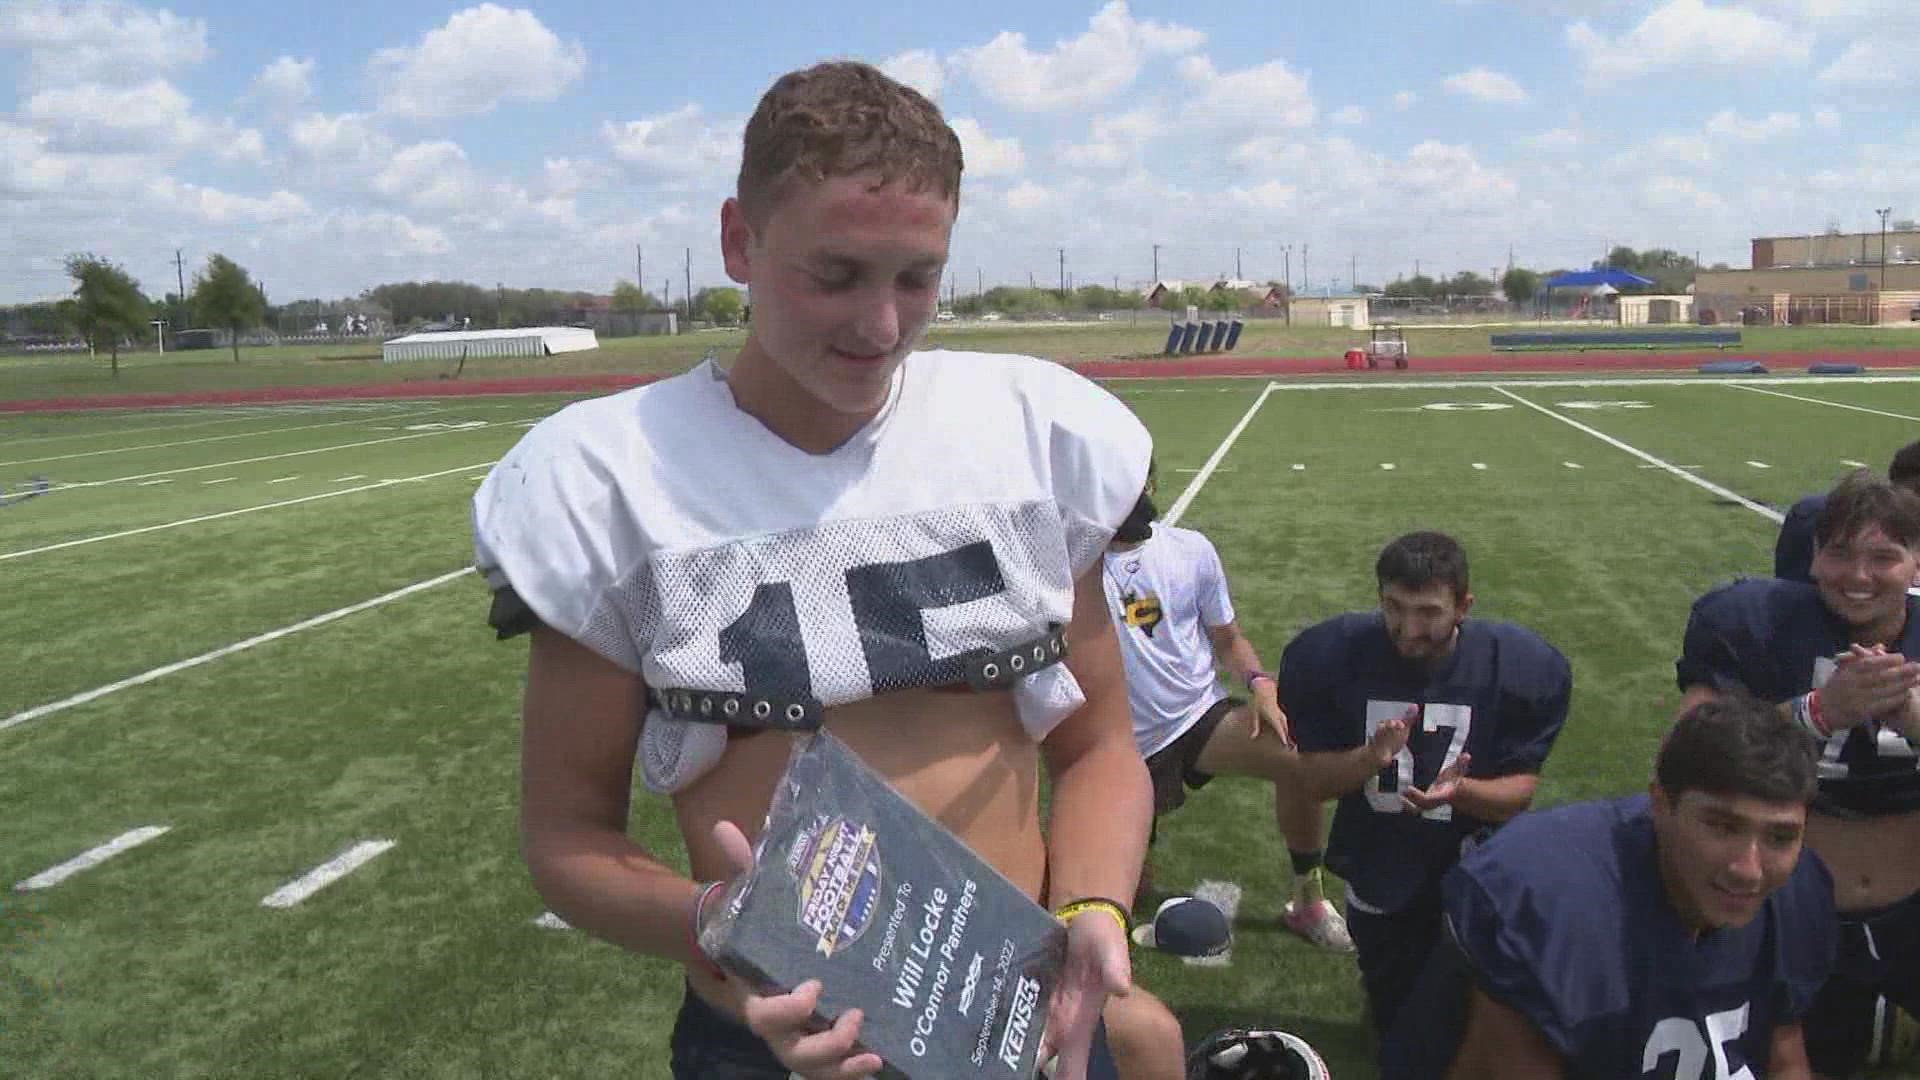 With a Play of the Week award now in hand, Locke says he and his team will continue fighting for a district title.